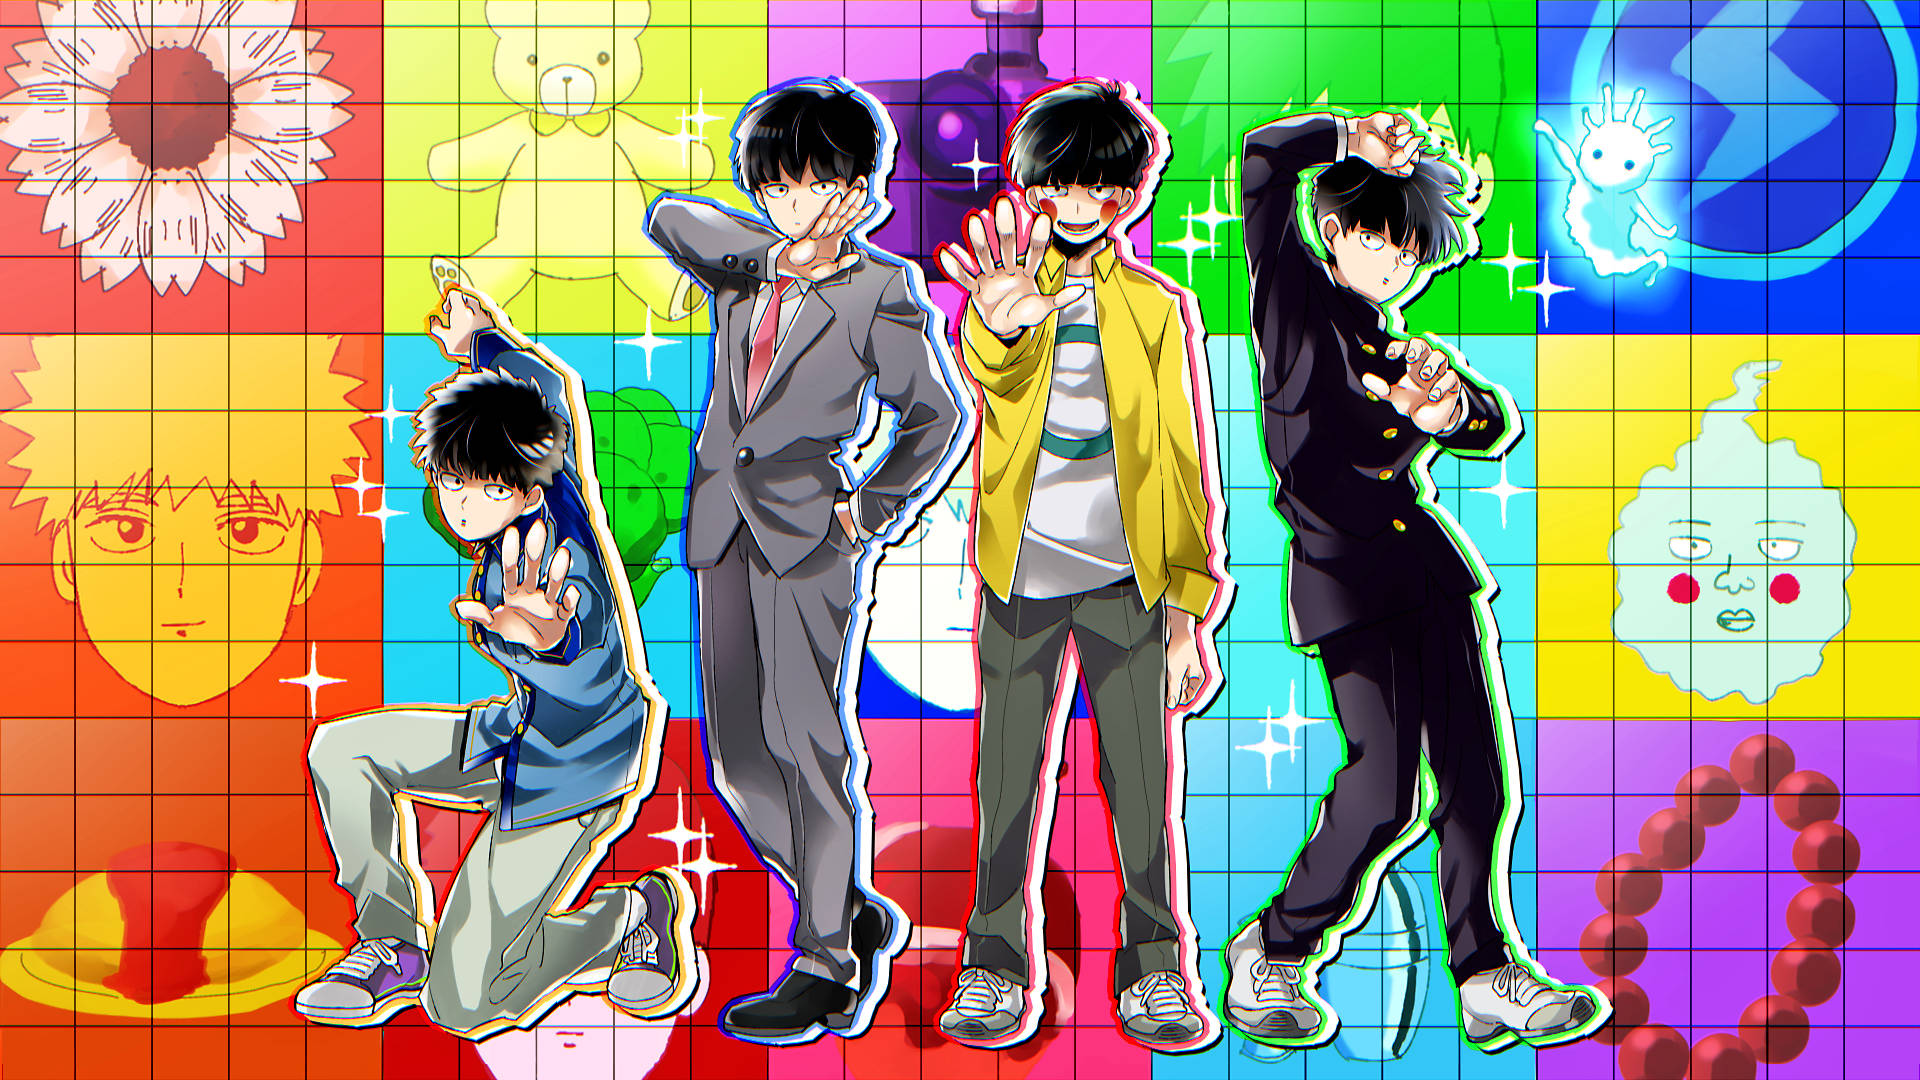 The Laughing Buddha knows no bounds in Mob Psycho 100 Wallpaper